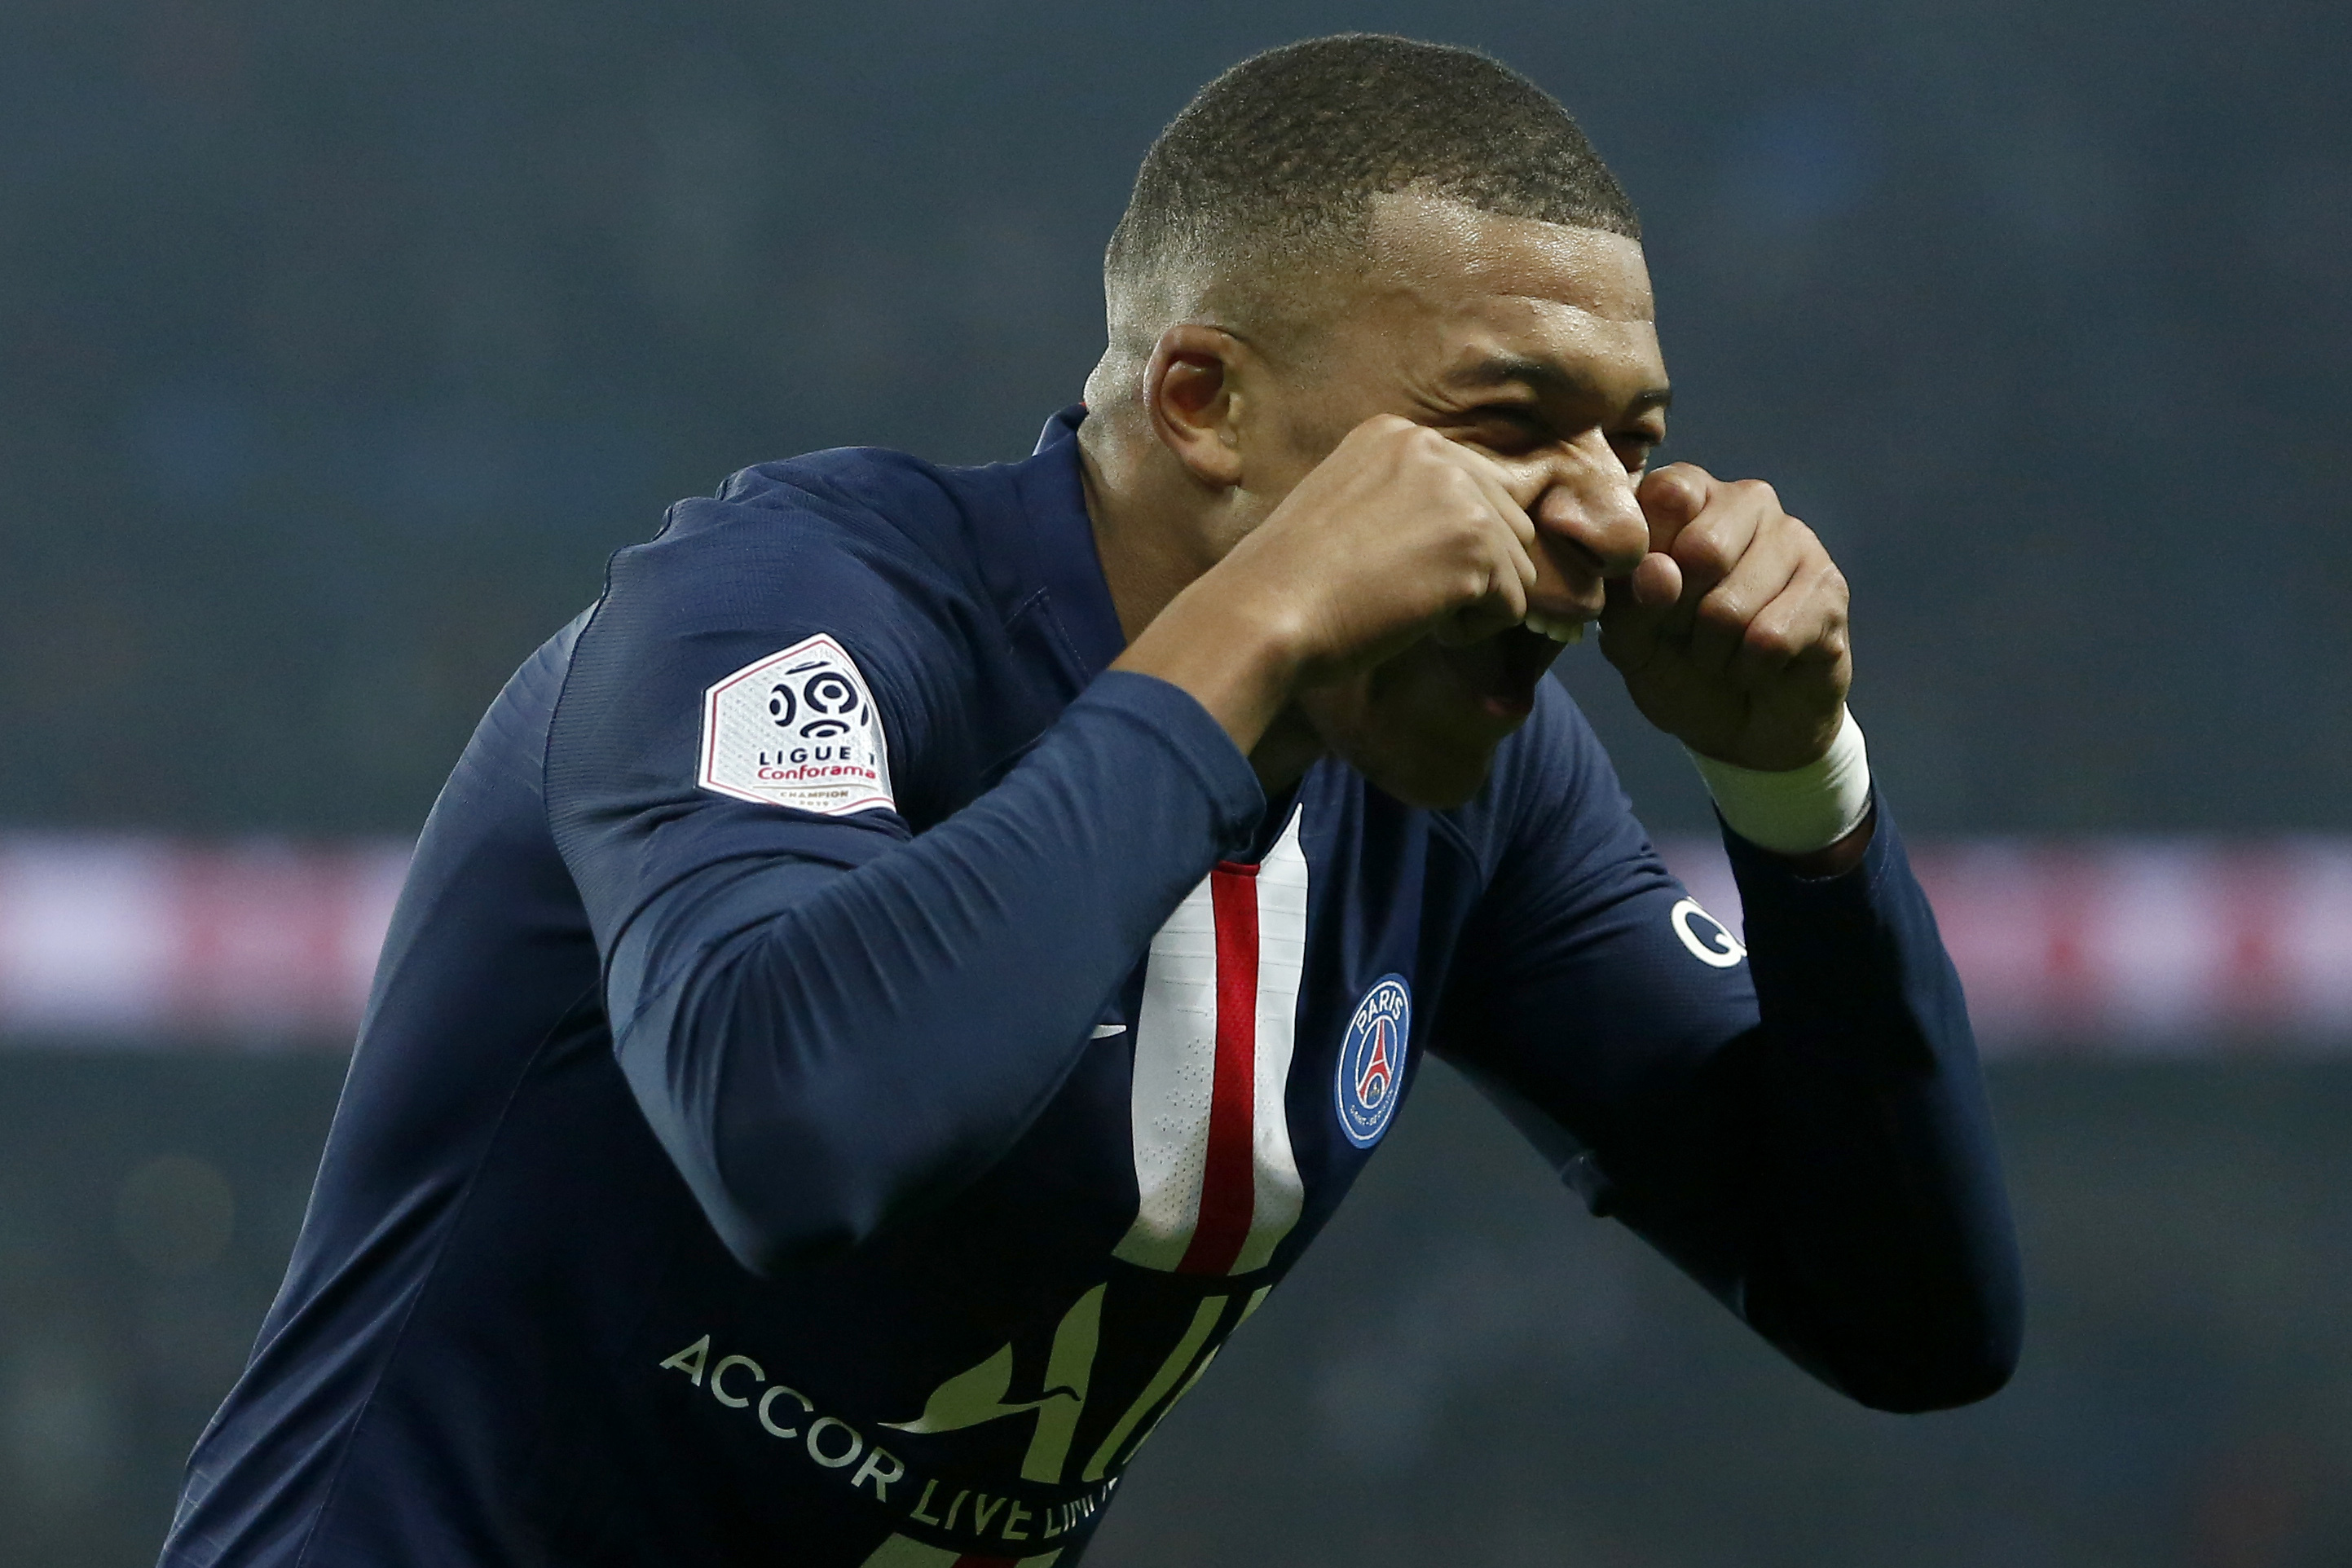 Kylian Mbappe's Crying Baby Would Be The Ultimate Troll Celebration On FIFA